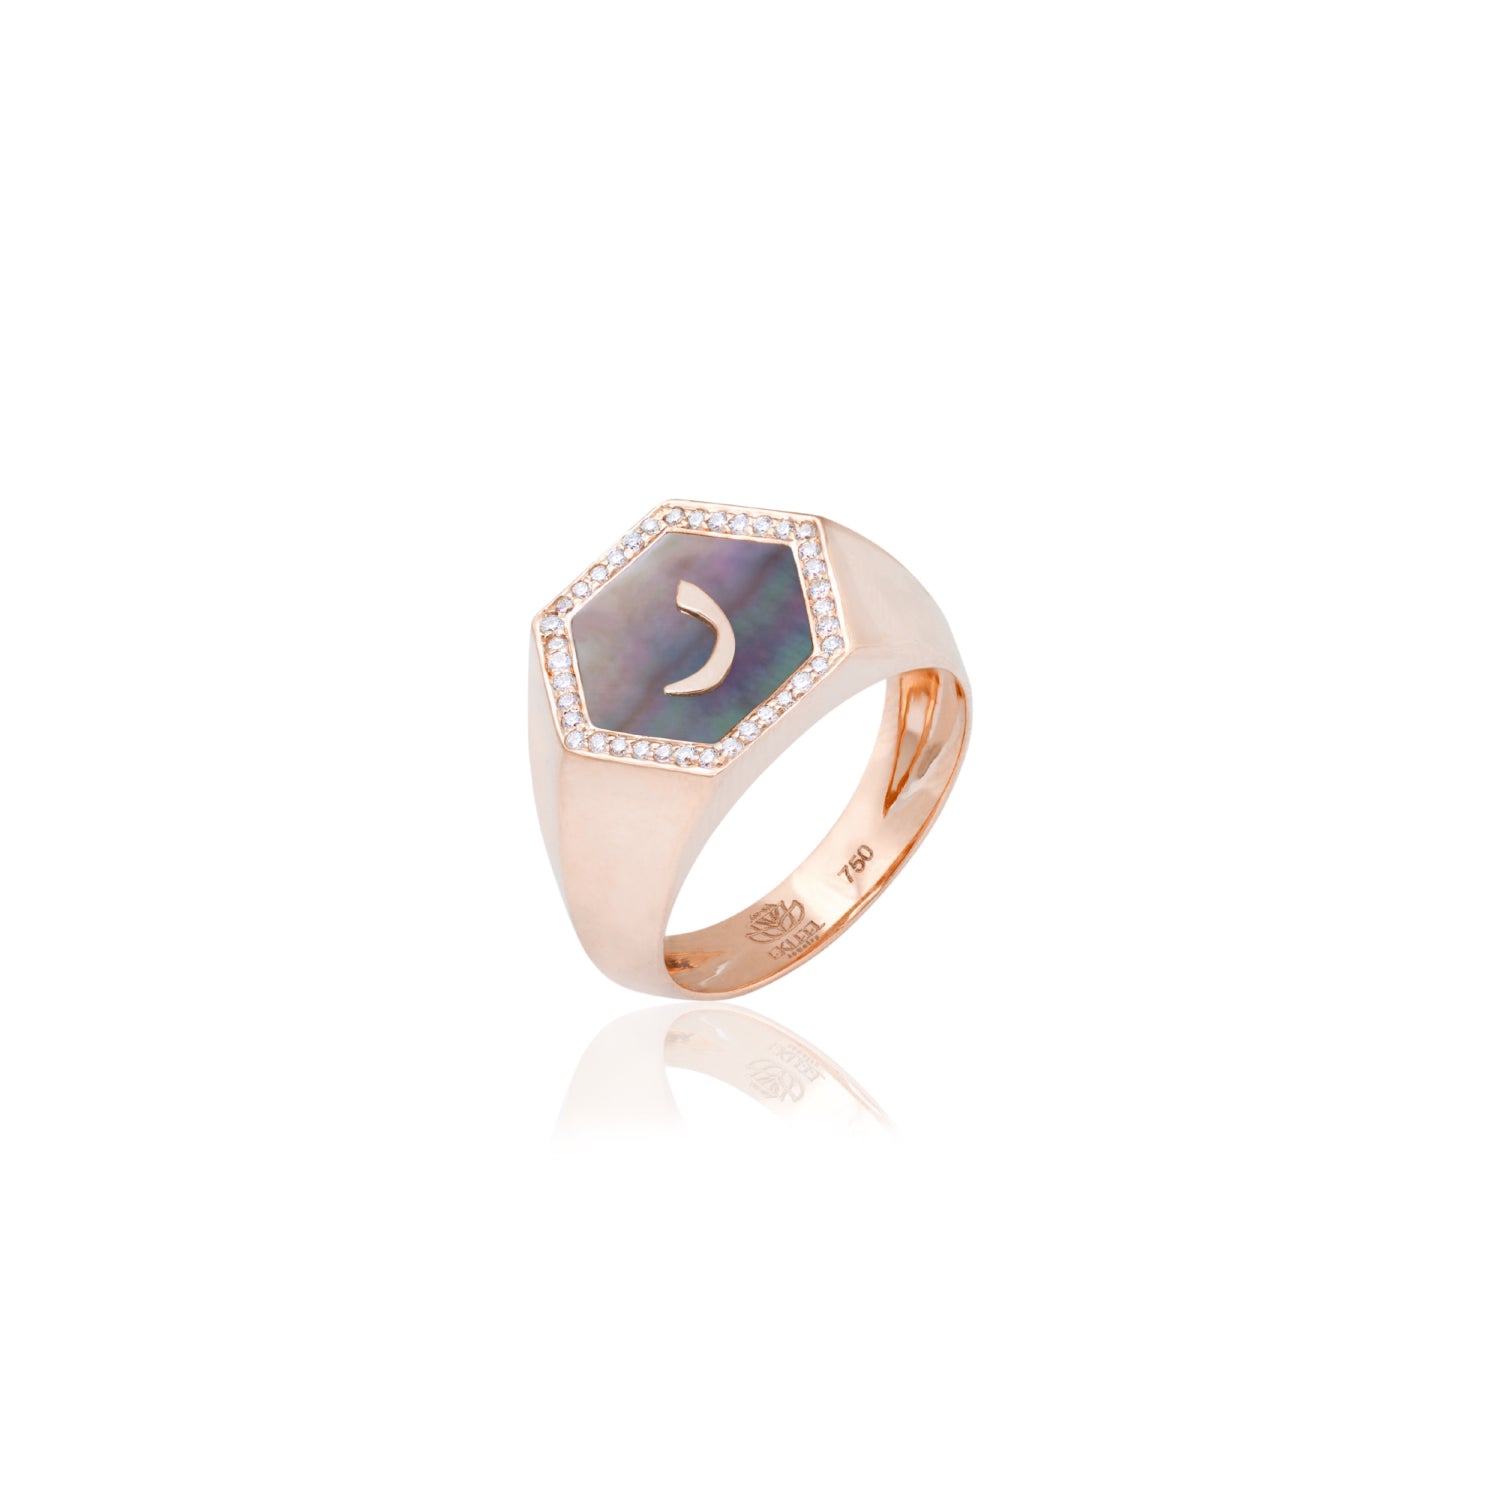 Qamoos 2.0 Letter ر Black Mother of Pearl and Diamond Signet Ring in Rose Gold